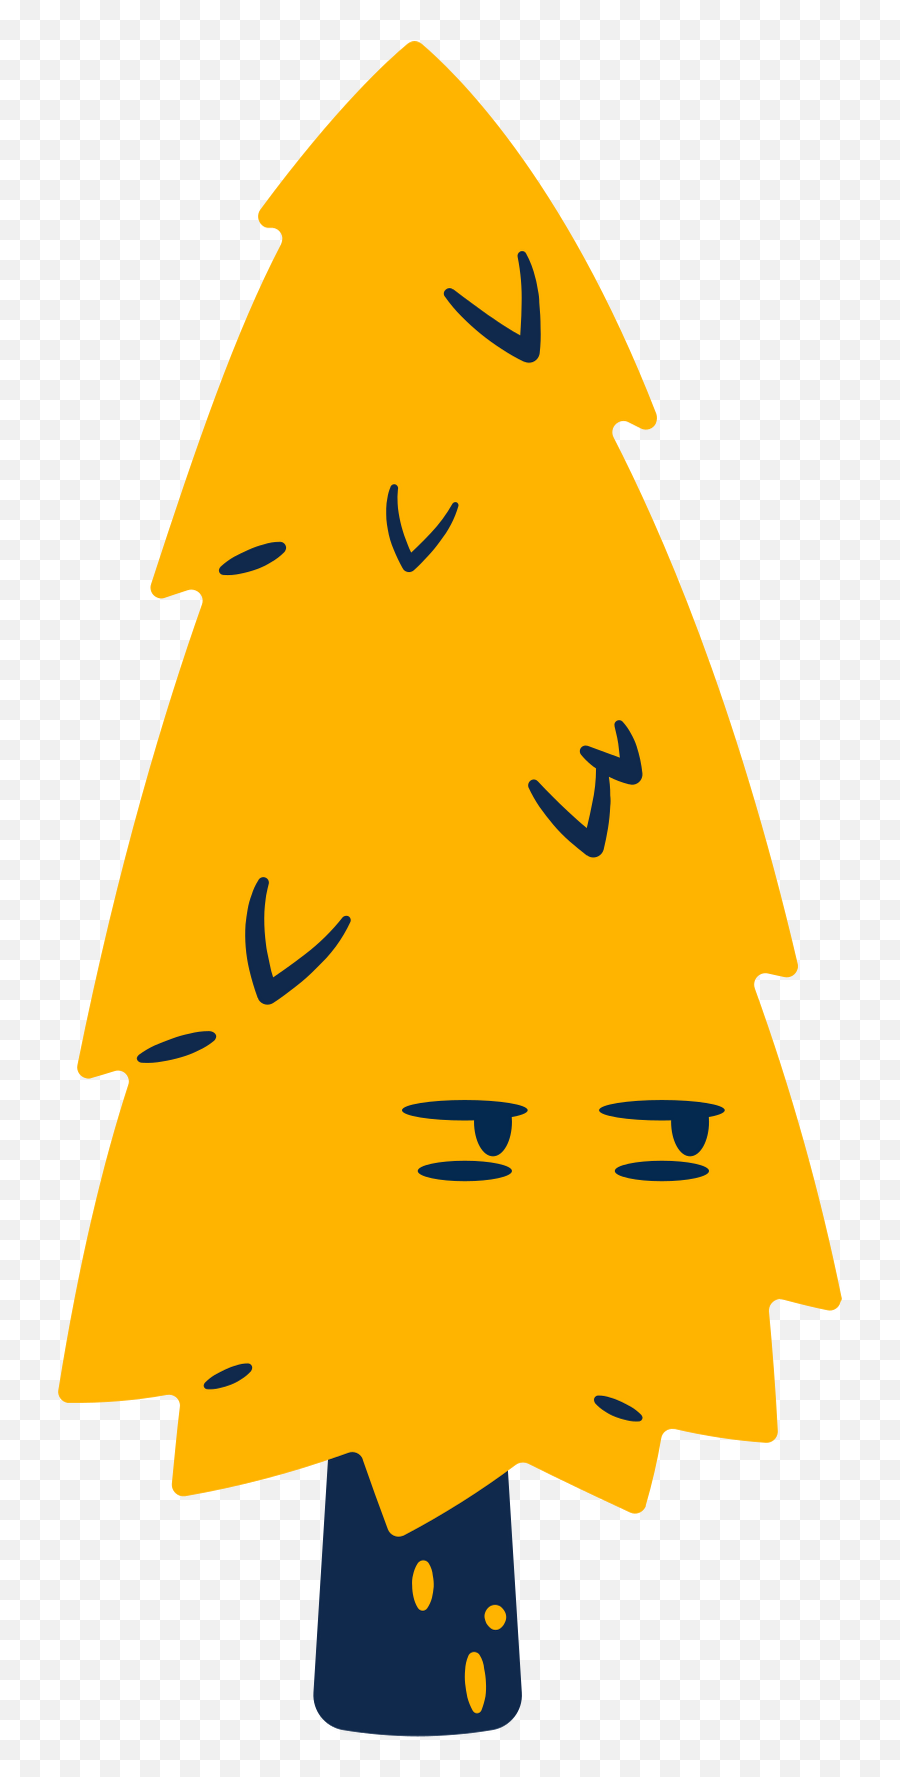 Annoyed Tree Clipart Illustrations U0026 Images In Png And Svg Emoji,Evergreen Tree Clipart